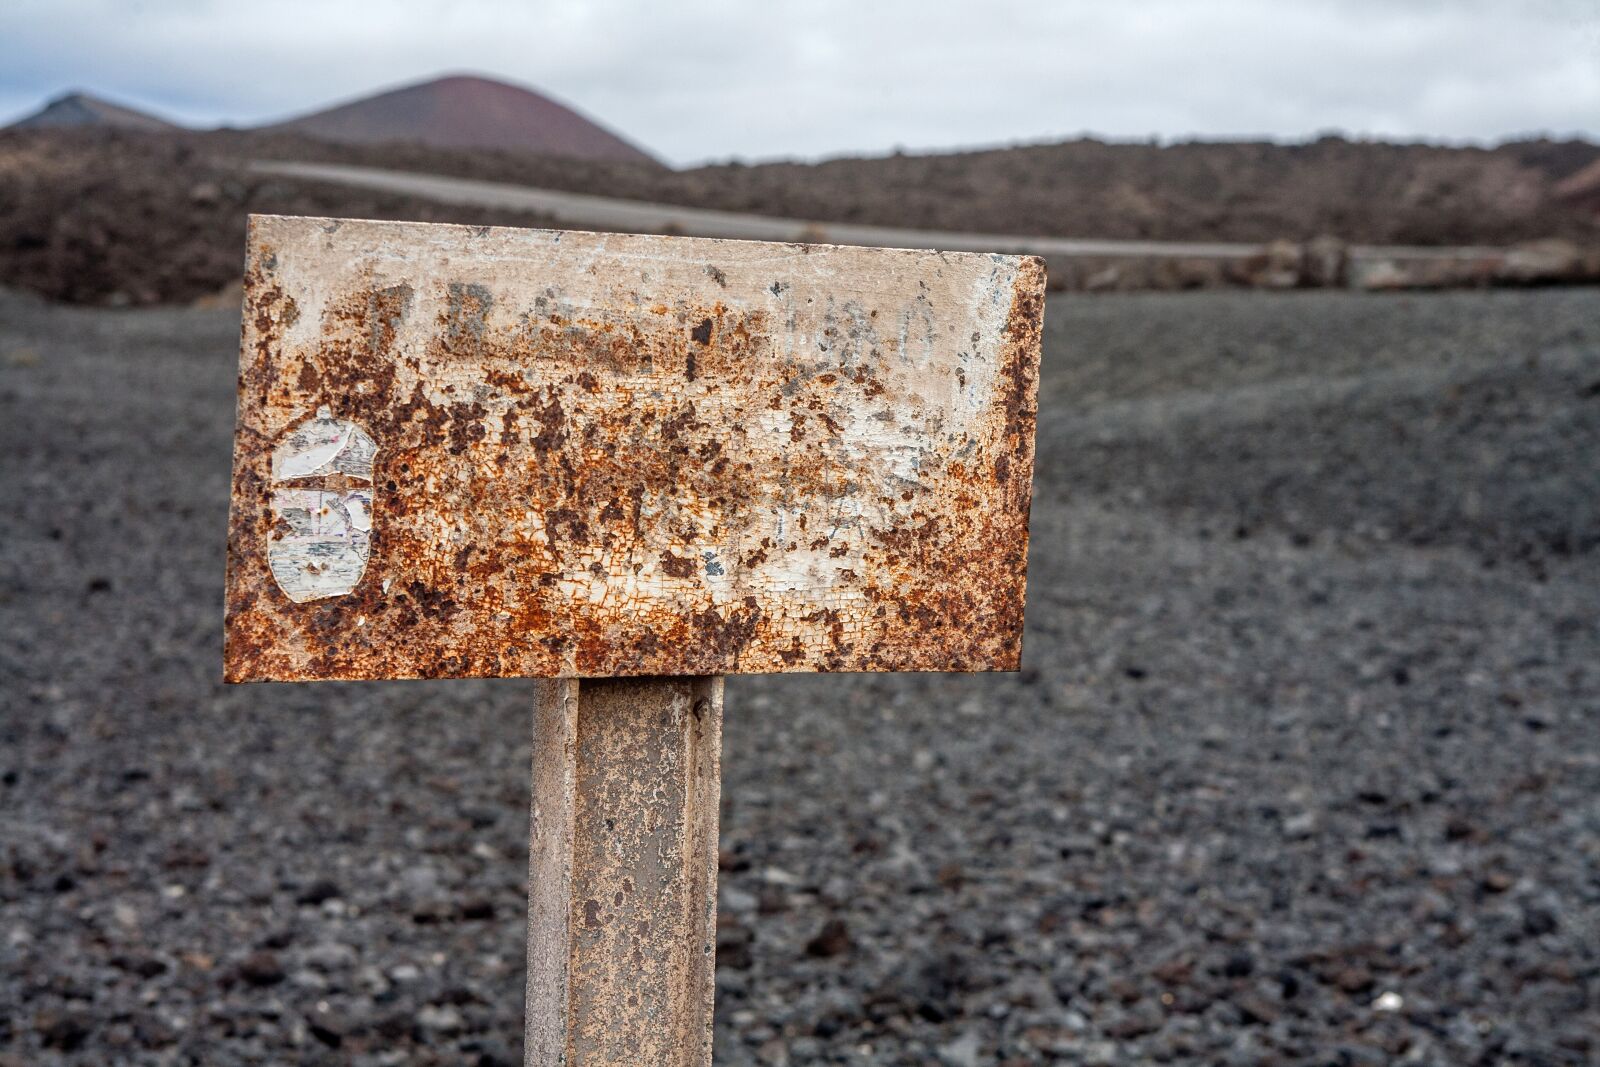 EF28-70mm f/2.8L USM sample photo. Rusty, lanzarote, sign photography